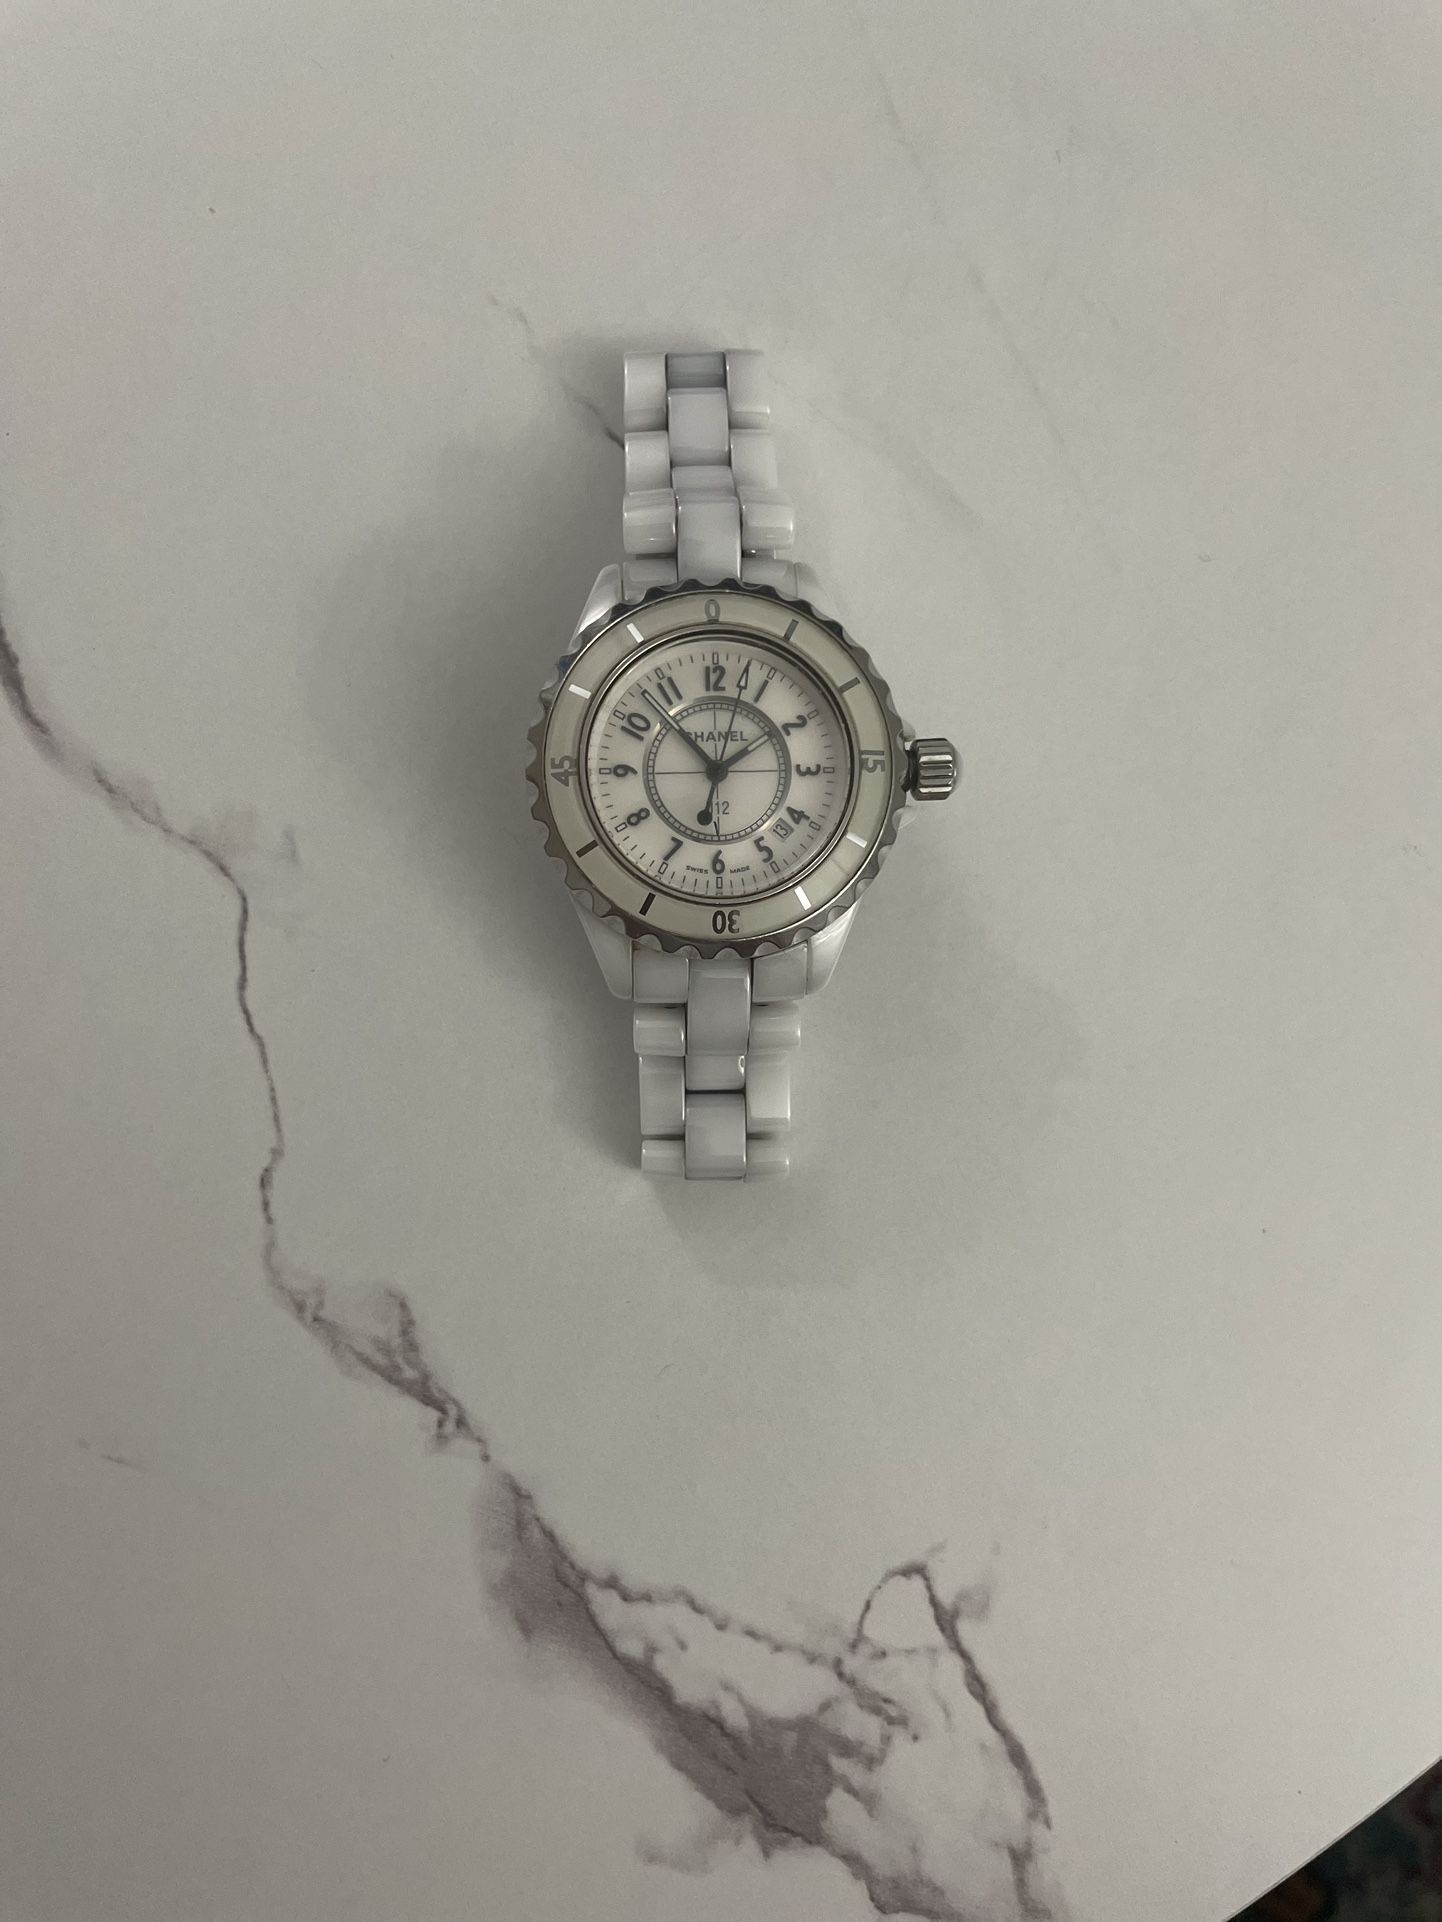 Chanel J12 Watch for Sale in Miami, FL - OfferUp